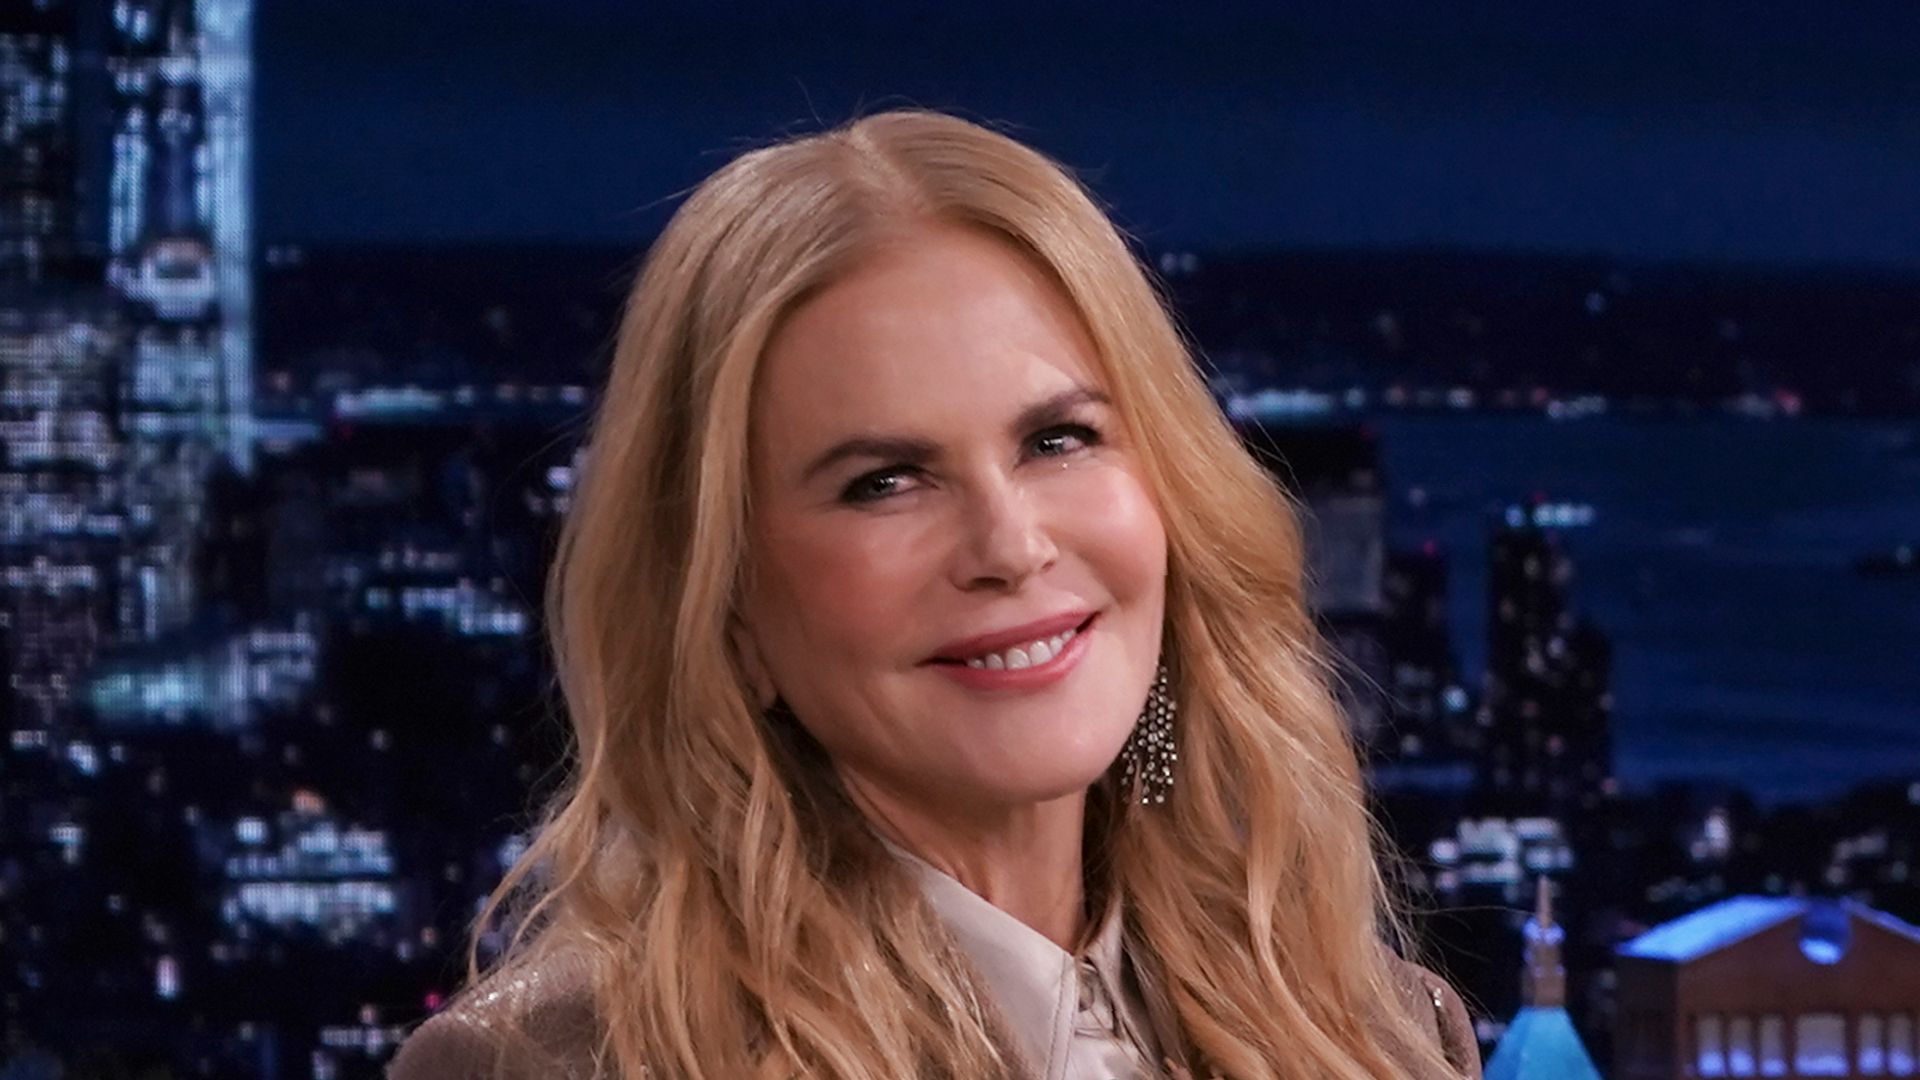 THE TONIGHT SHOW STARRING JIMMY FALLON -- Episode 1567 -- Pictured: Actress Nicole Kidman during an interview on Wednesday, December 8, 2021